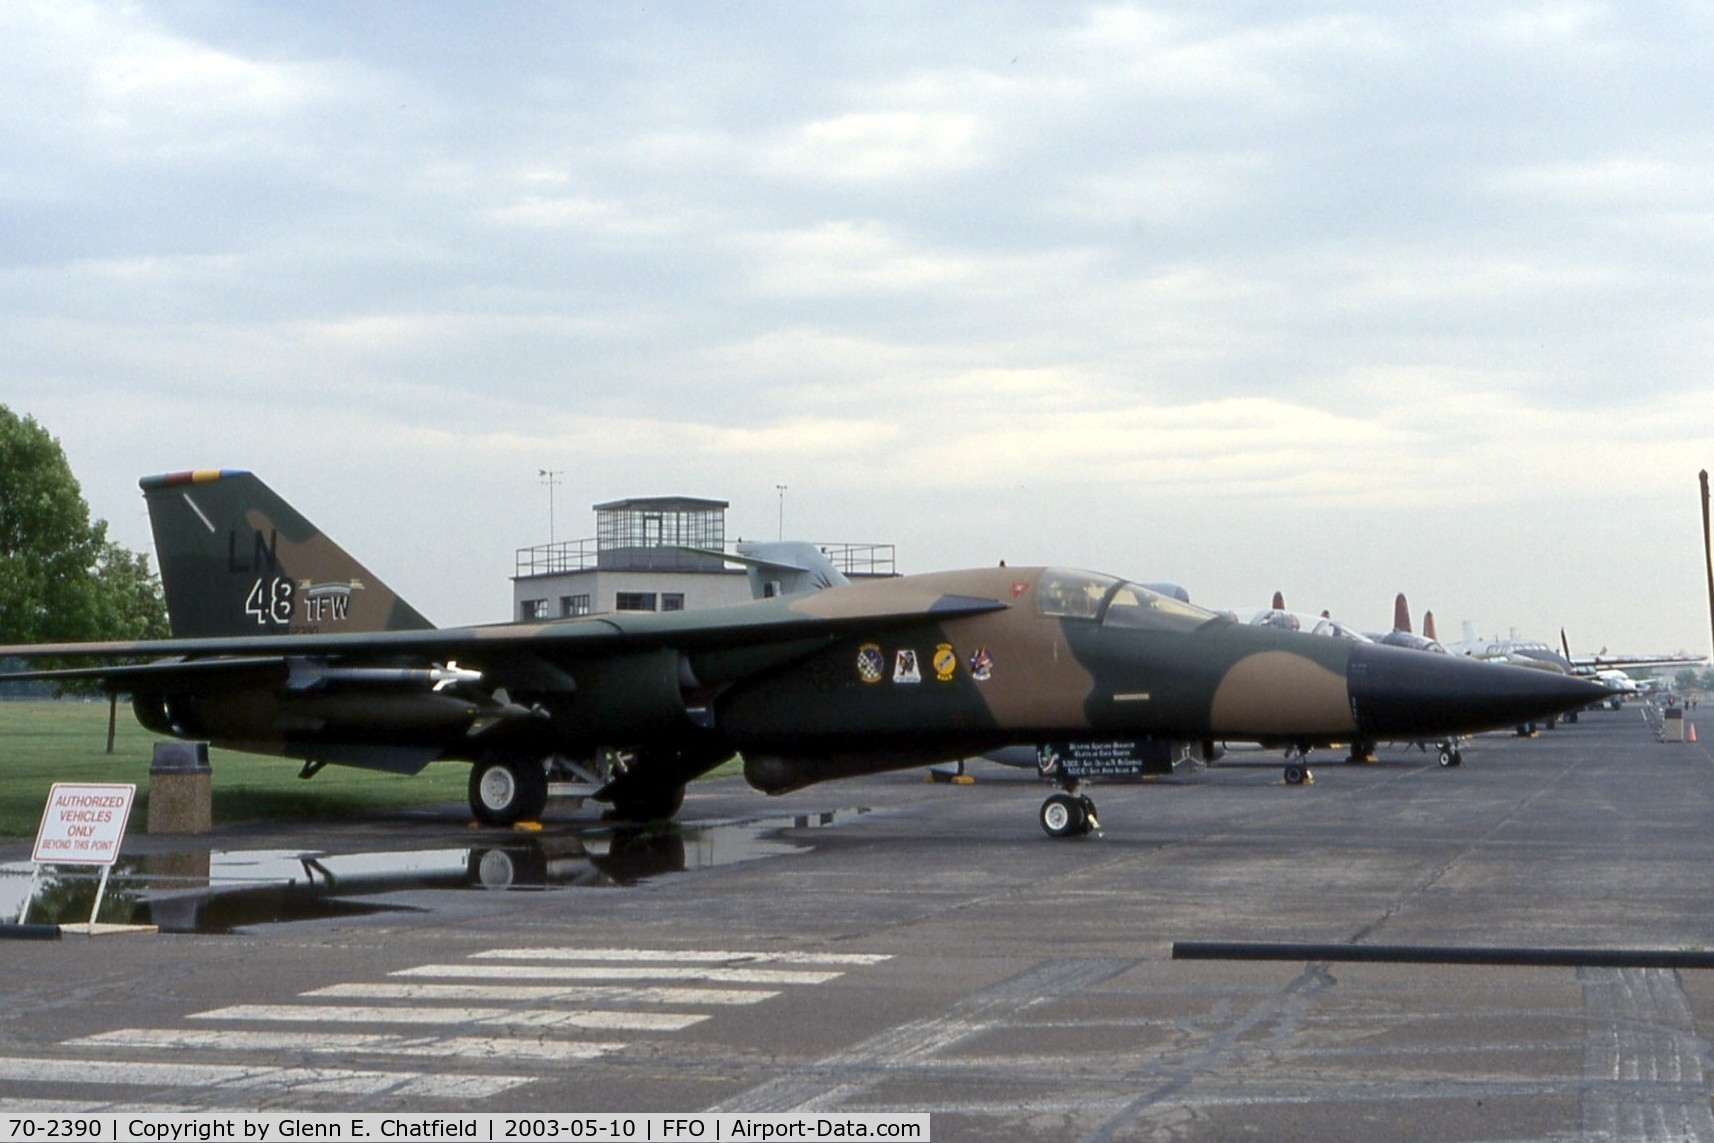 70-2390, 1970 General Dynamics F-111F Aardvark C/N E2-29, F-111F at the National Museum of the U.S. Air Force